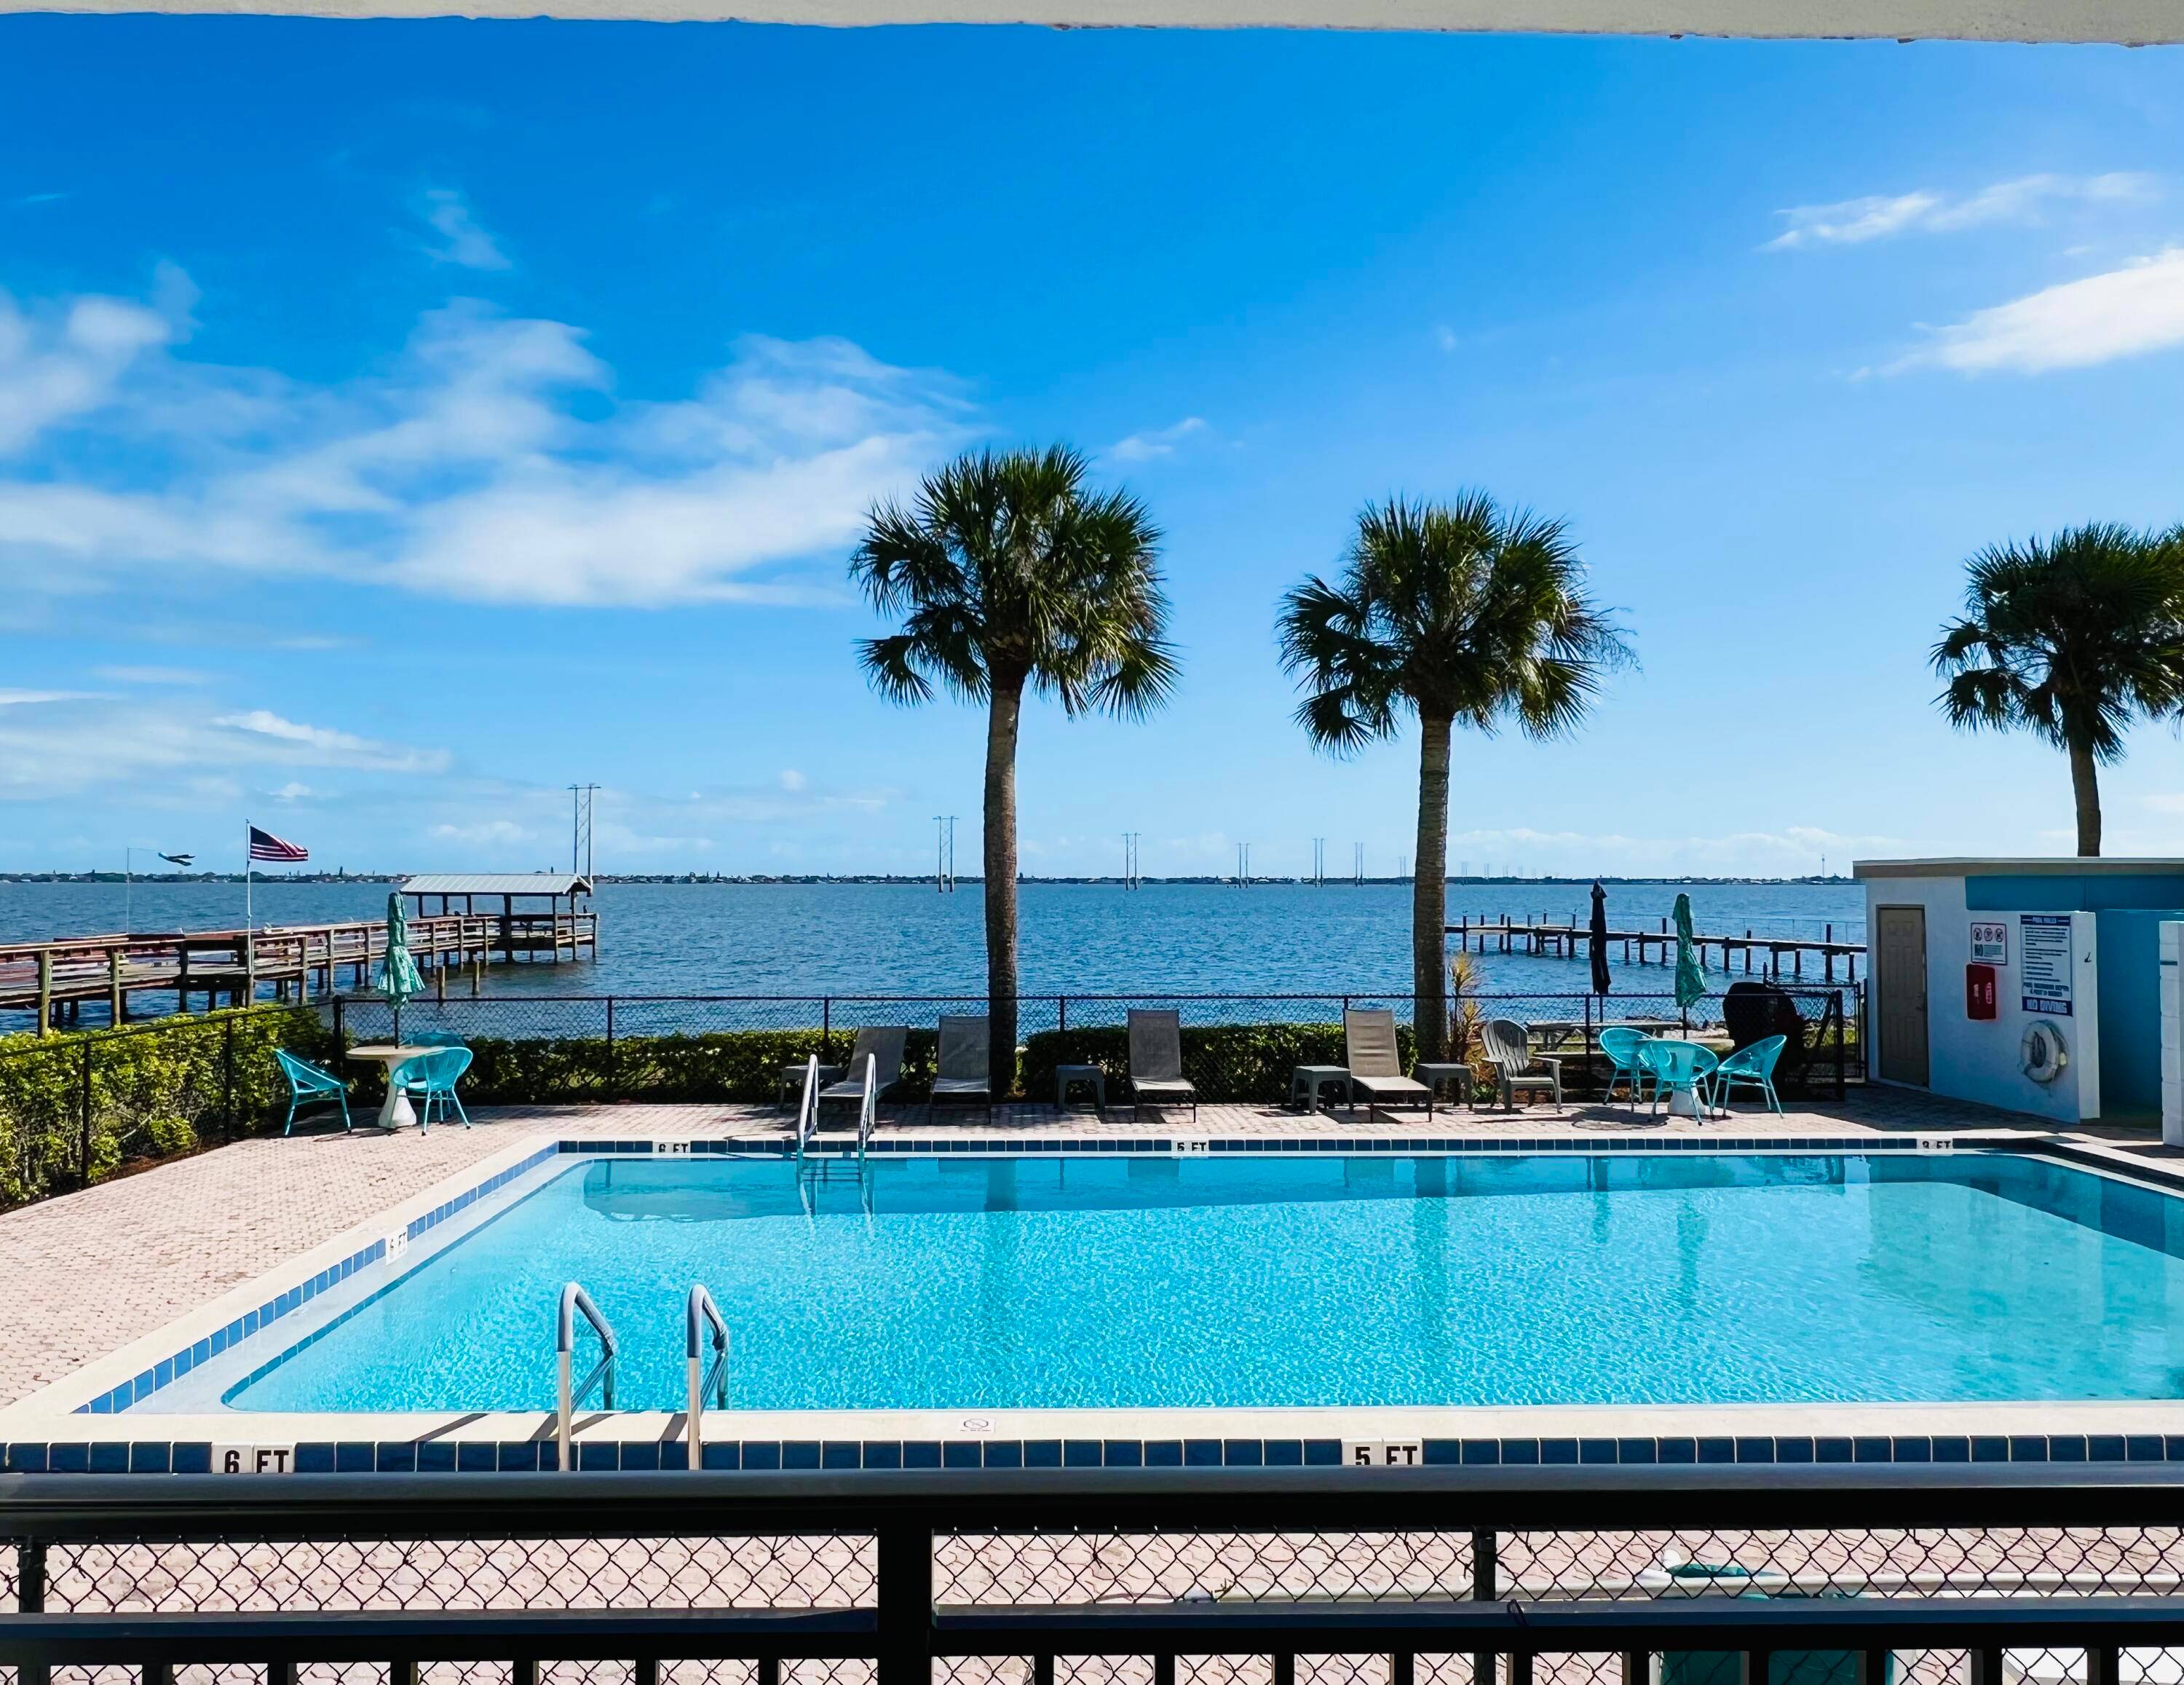 Completely remodeled waterfront condo 2b 2b 1st floor unit with private balcony to an amazing view of the river, swimming pool, dolphins, and rocket launches.